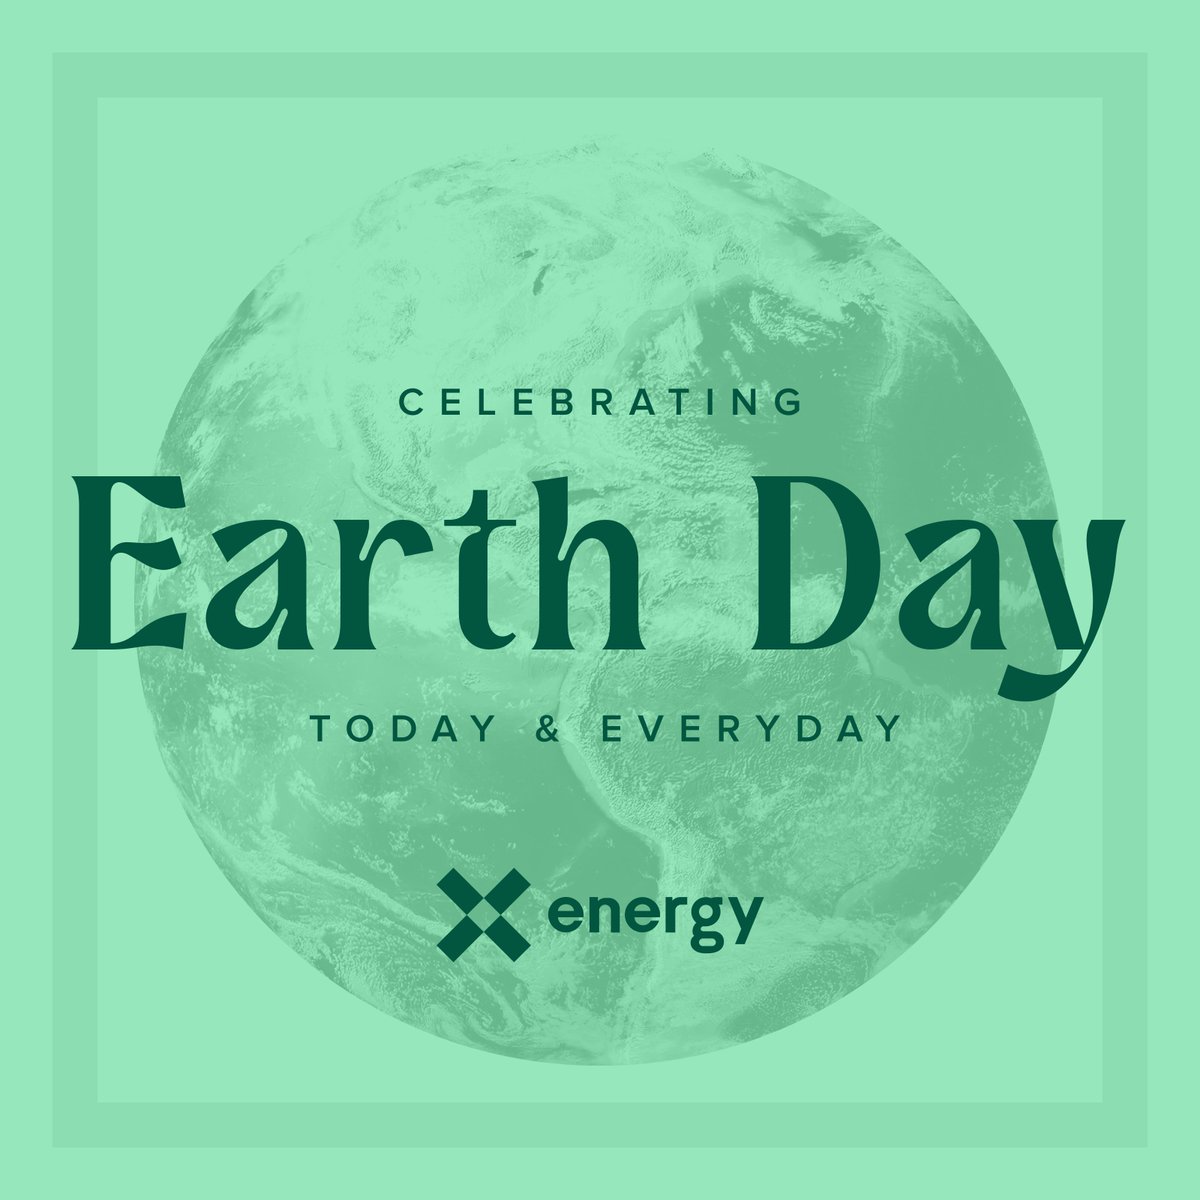 🌎 Earth Day is not only a moment to celebrate our planet, it's a recommitment to the actions that make a real impact. X-energy's journey toward a cleaner, safer, and more sustainable world goes beyond Earth Day—it's woven into the fabric of everything we do. We believe in 💡…